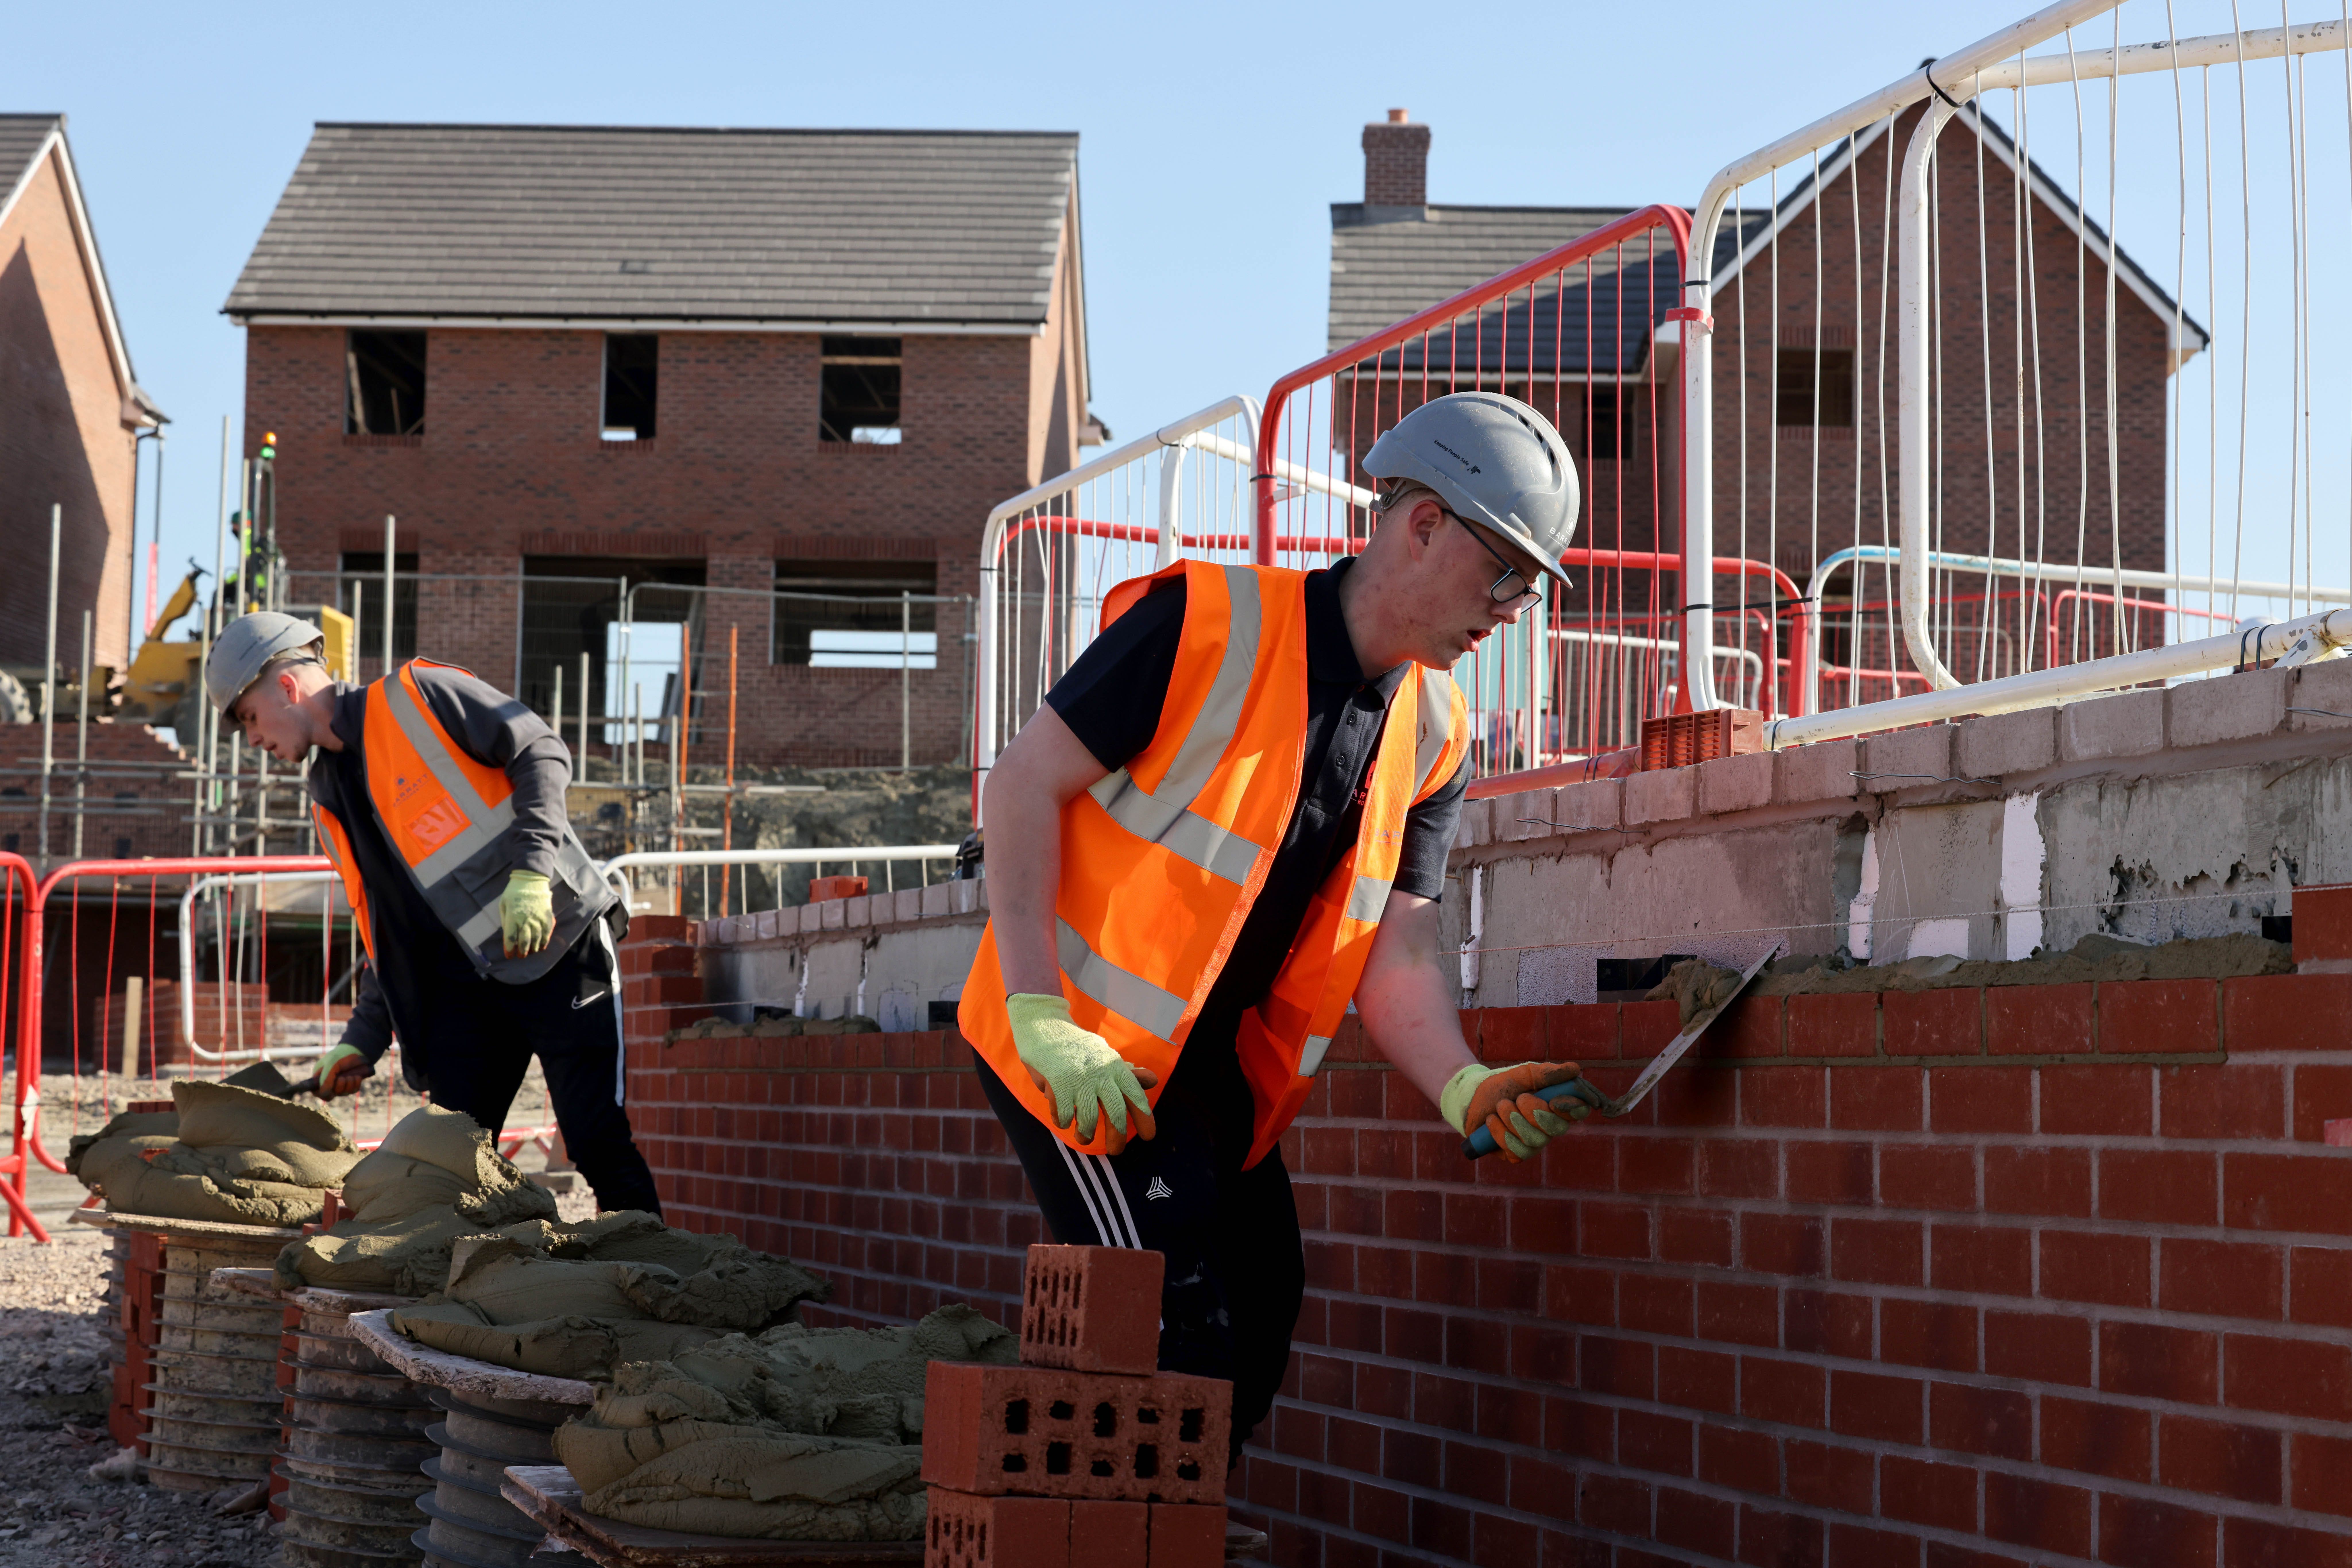 Barratt Developments has warned of a slump in house builds as it said cost-of-living pressures and rising mortgage rates were impacting homebuyer demand (PA)